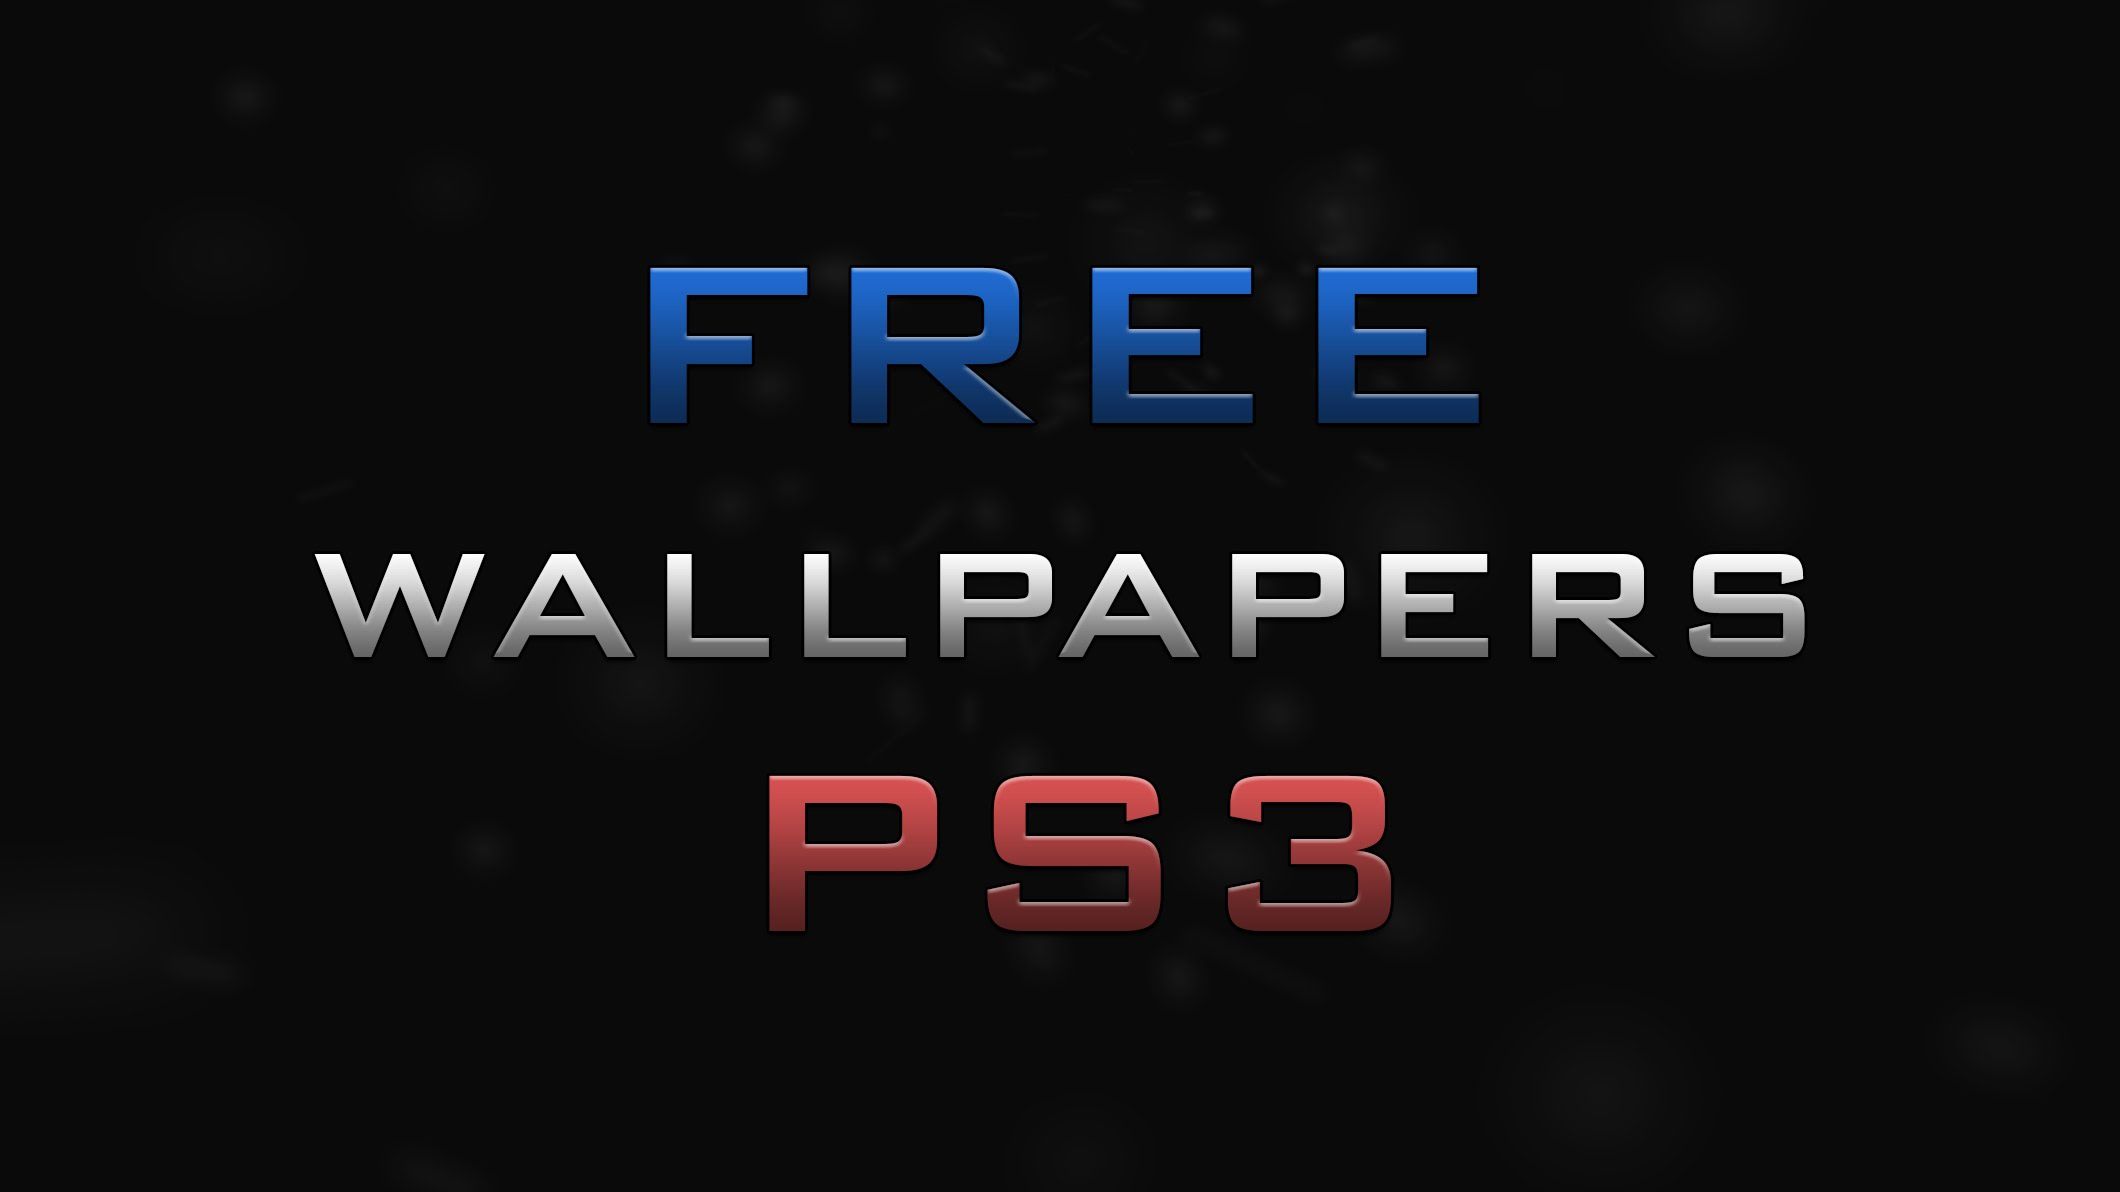 How to get free wallpaper ps3 - YouTube